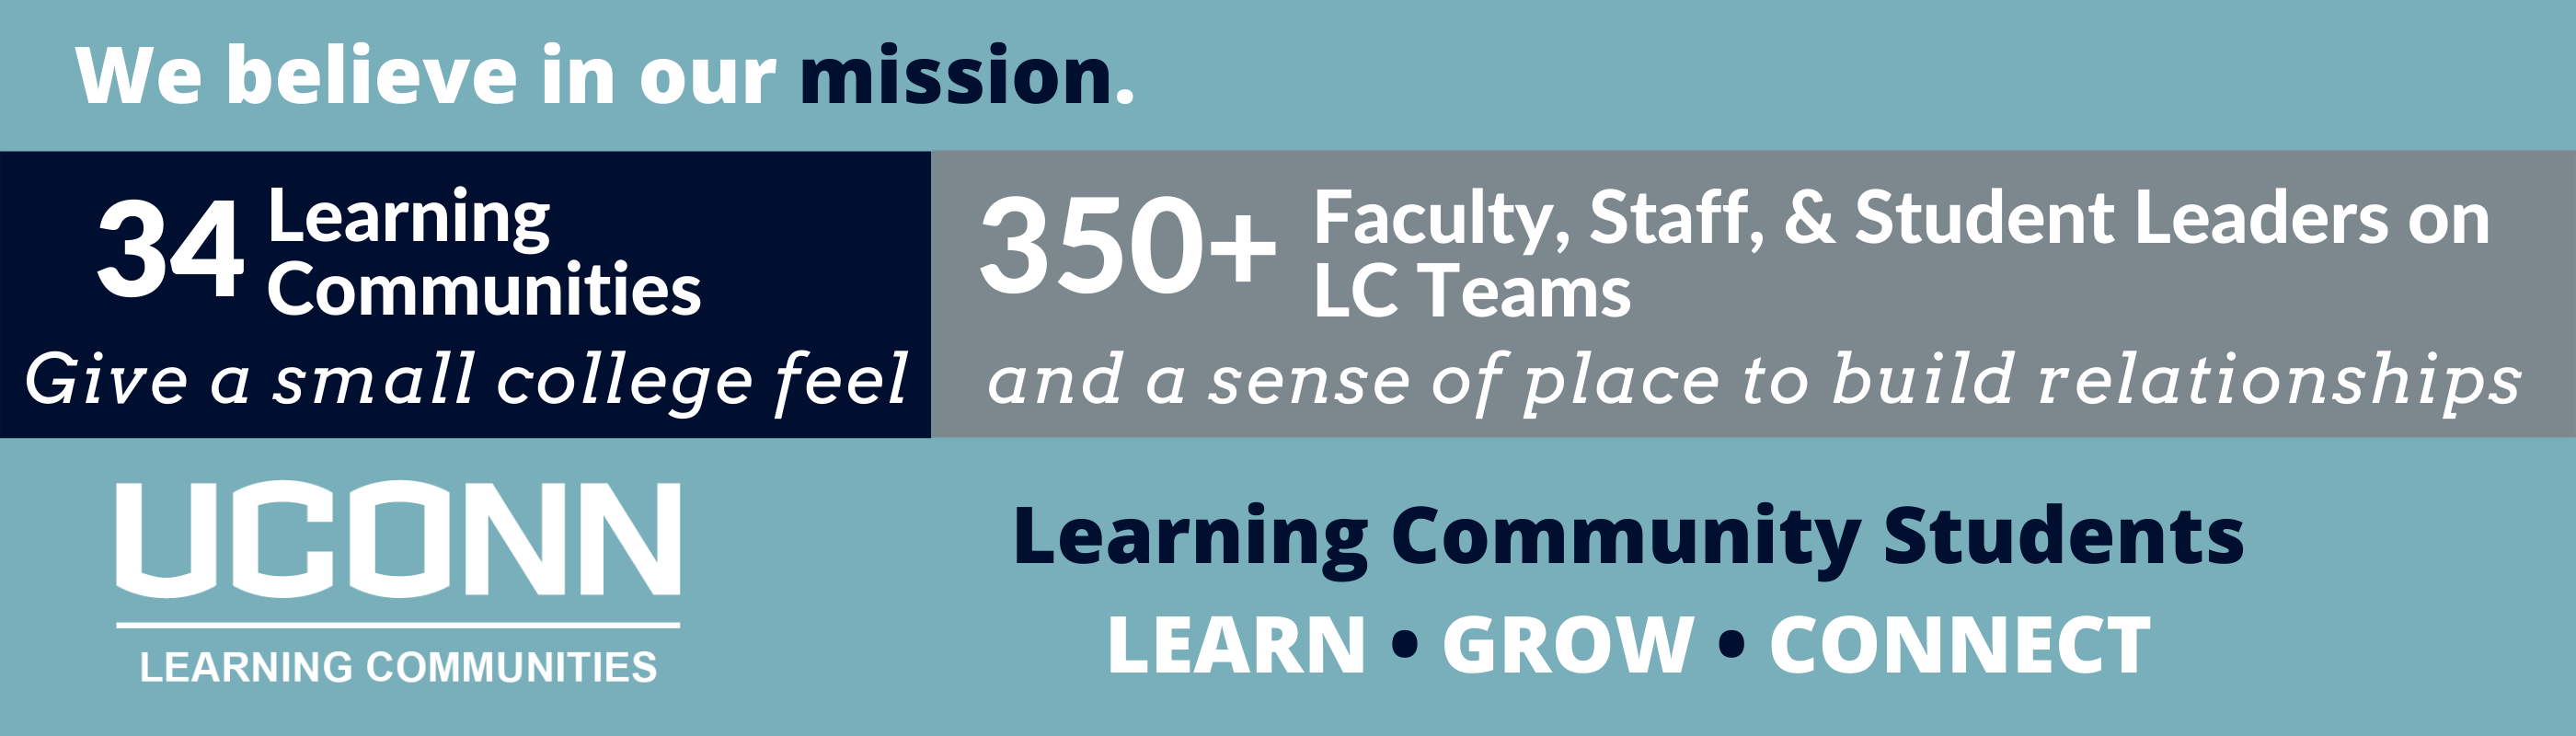 Mission: 33 Learning Communities give a small college feel and a sense of place to build relationships with 350+ faculty, staff & student leaders on LC Teams.